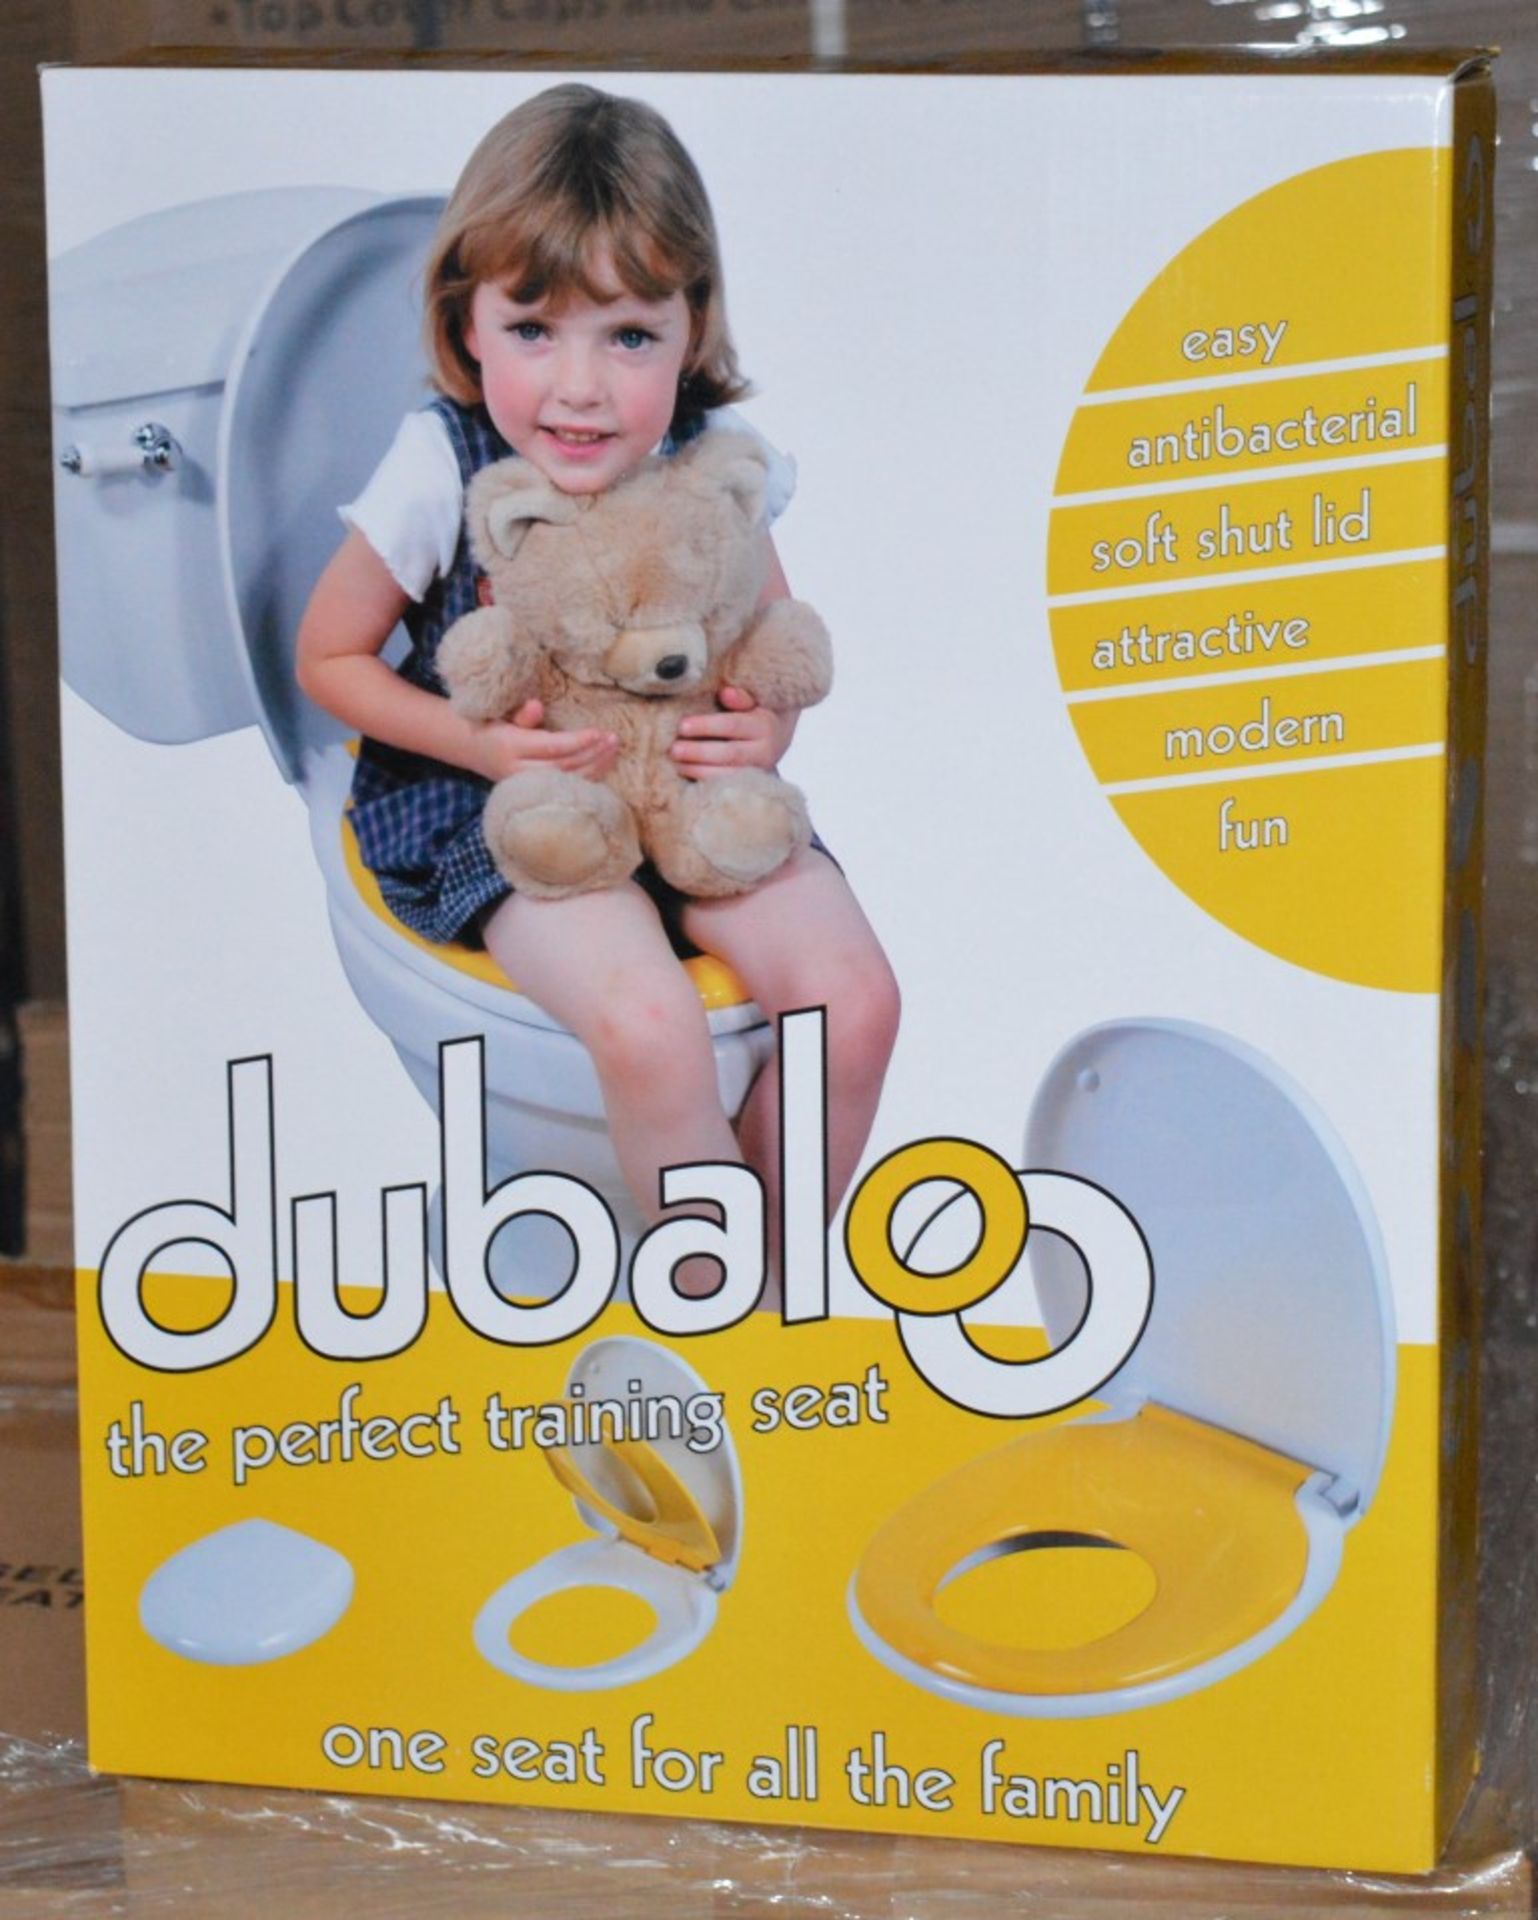 1 x Dubaloo 2 in 1 Family Training Toilet Seat - One Seat For All The Family - Full Size Toilet Seat - Image 4 of 7